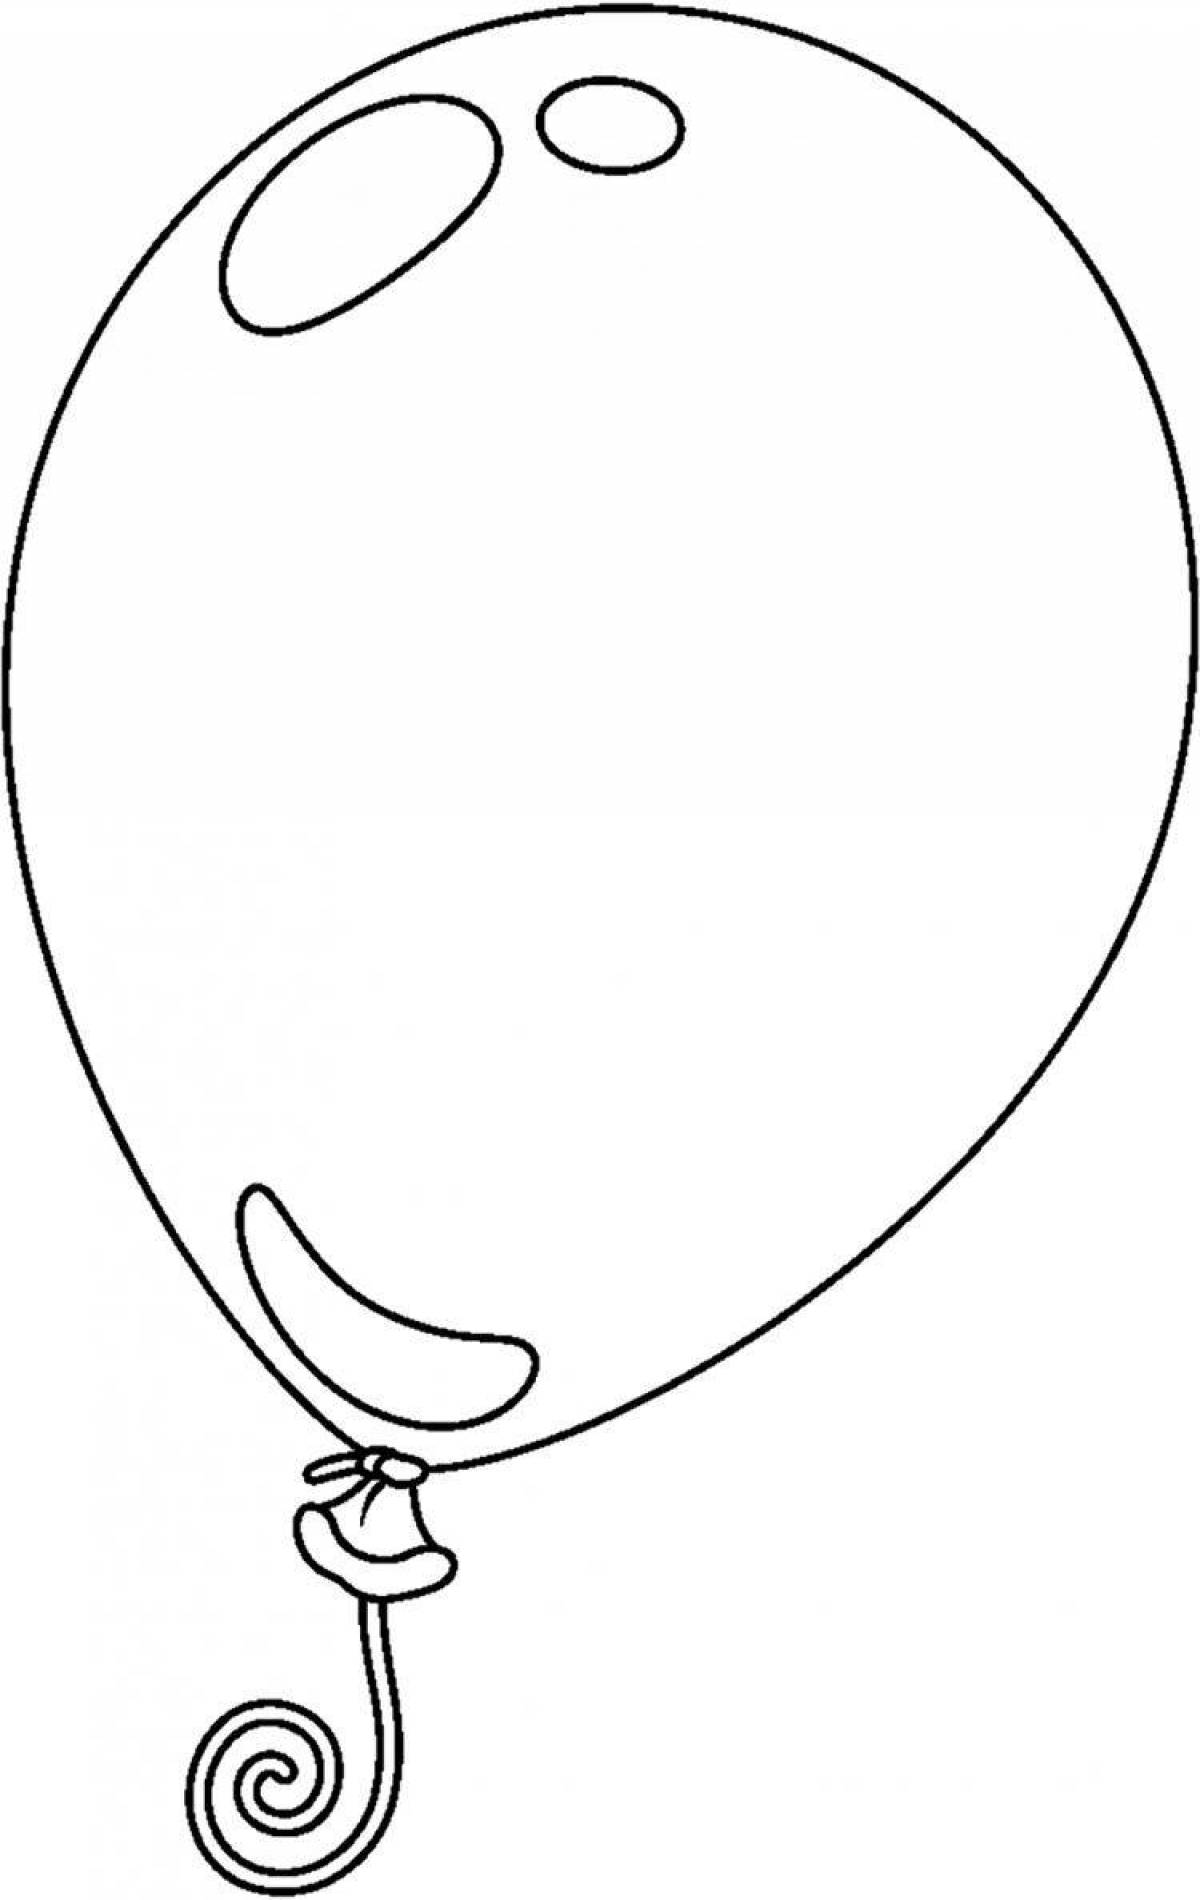 Exciting coloring book with balloons for kids